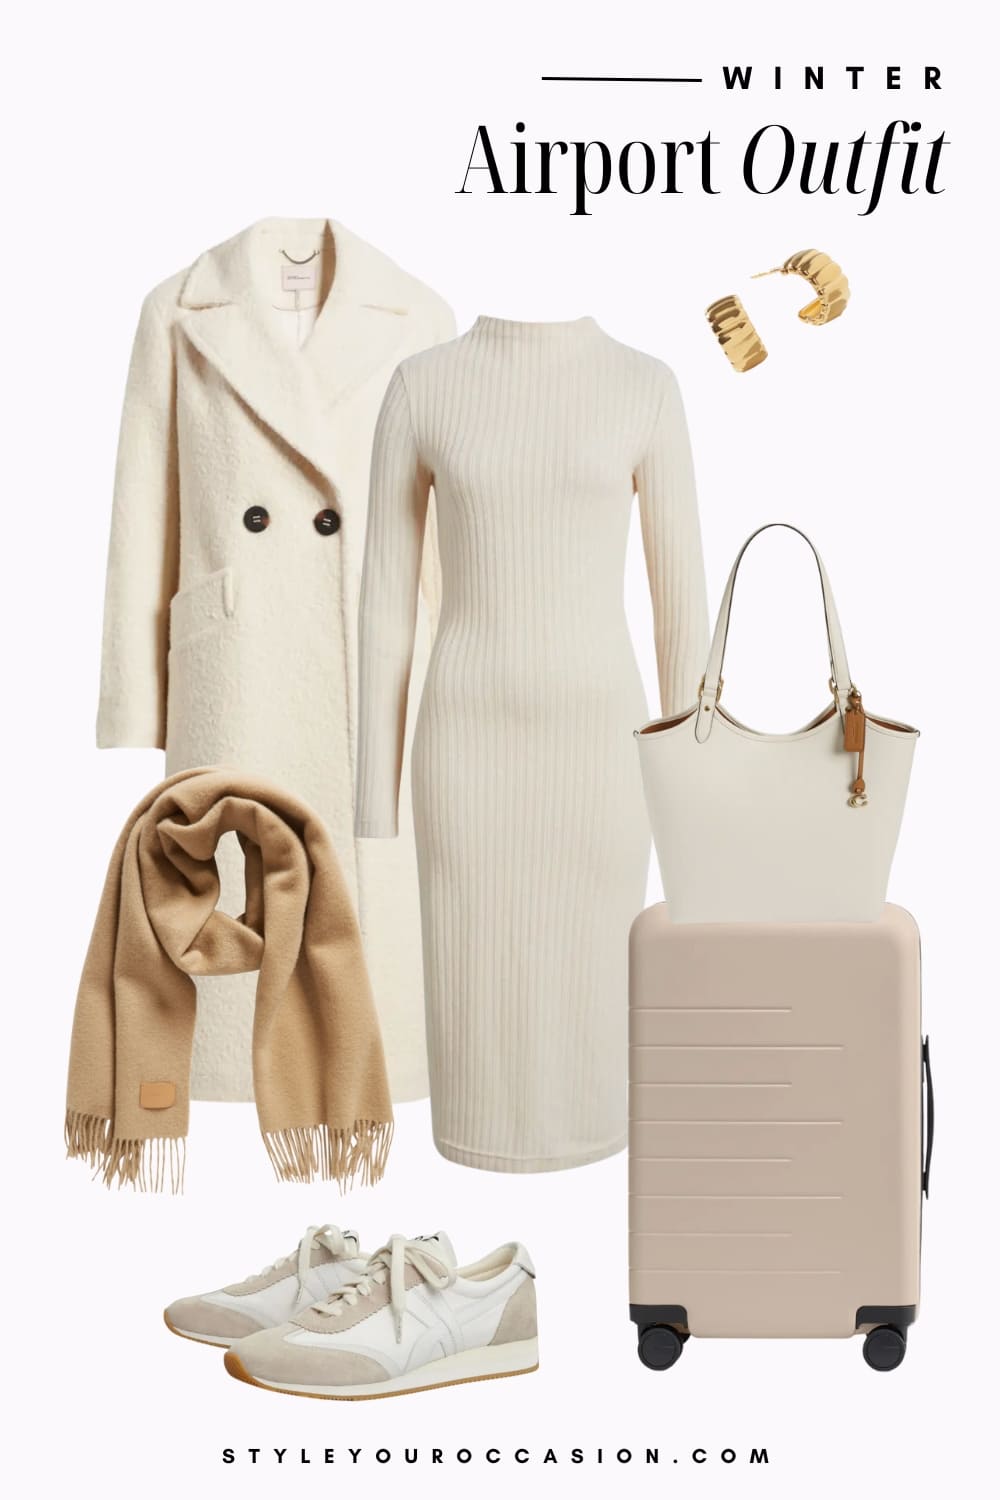 Graphic of a winter airport outfit including a white sweater dress, a white coat, sneakers and a tan scarf.